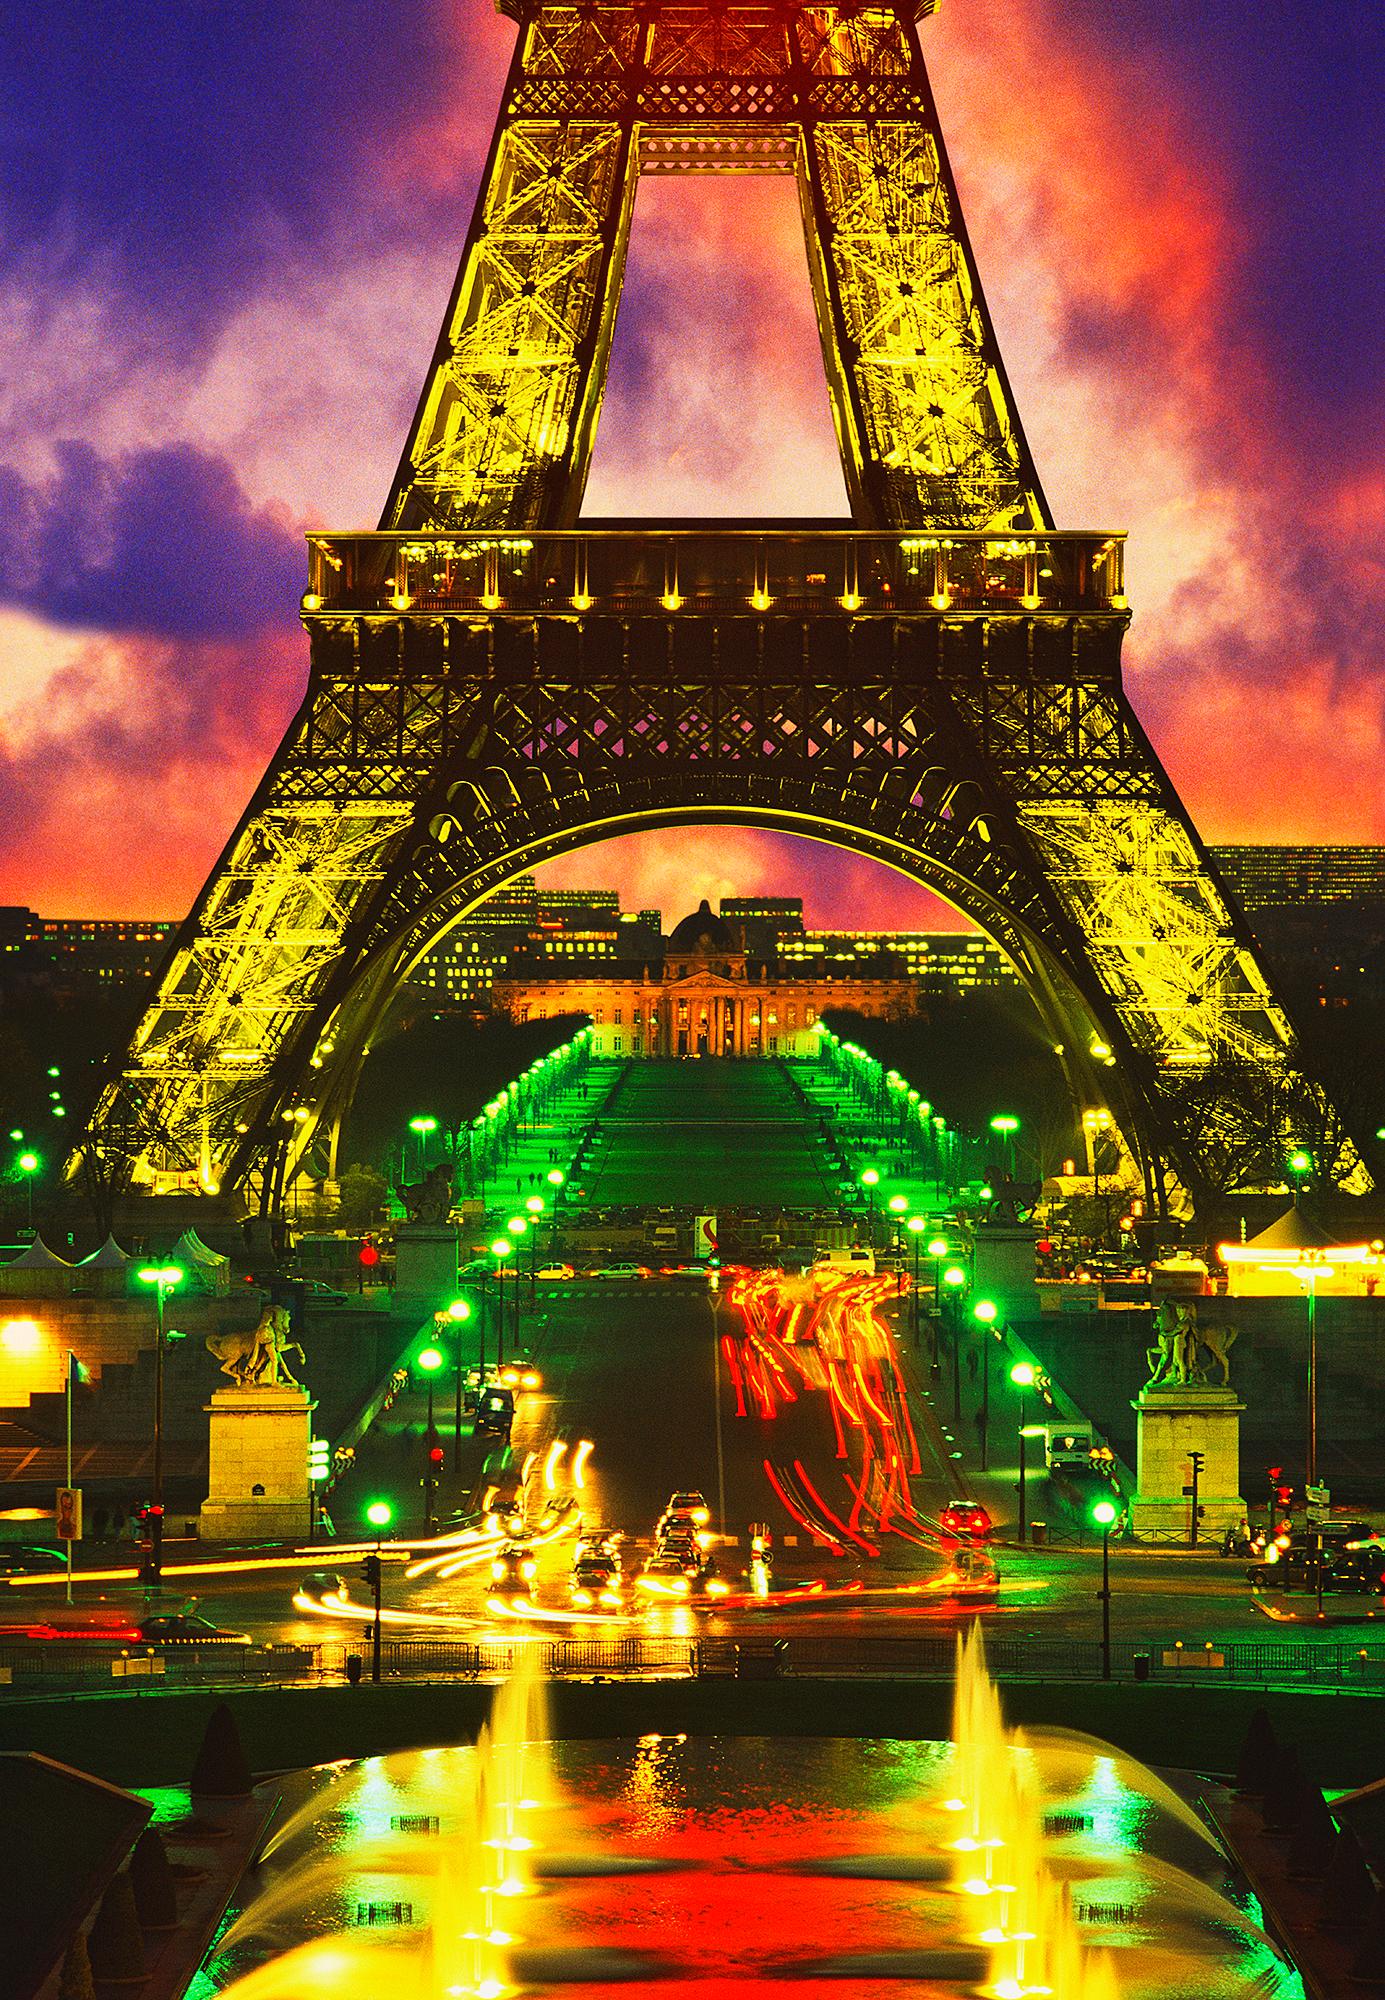 Mitchell Funk Landscape Photograph - Eiffel Tower At Dusk With Dramatic Sky, Paris France